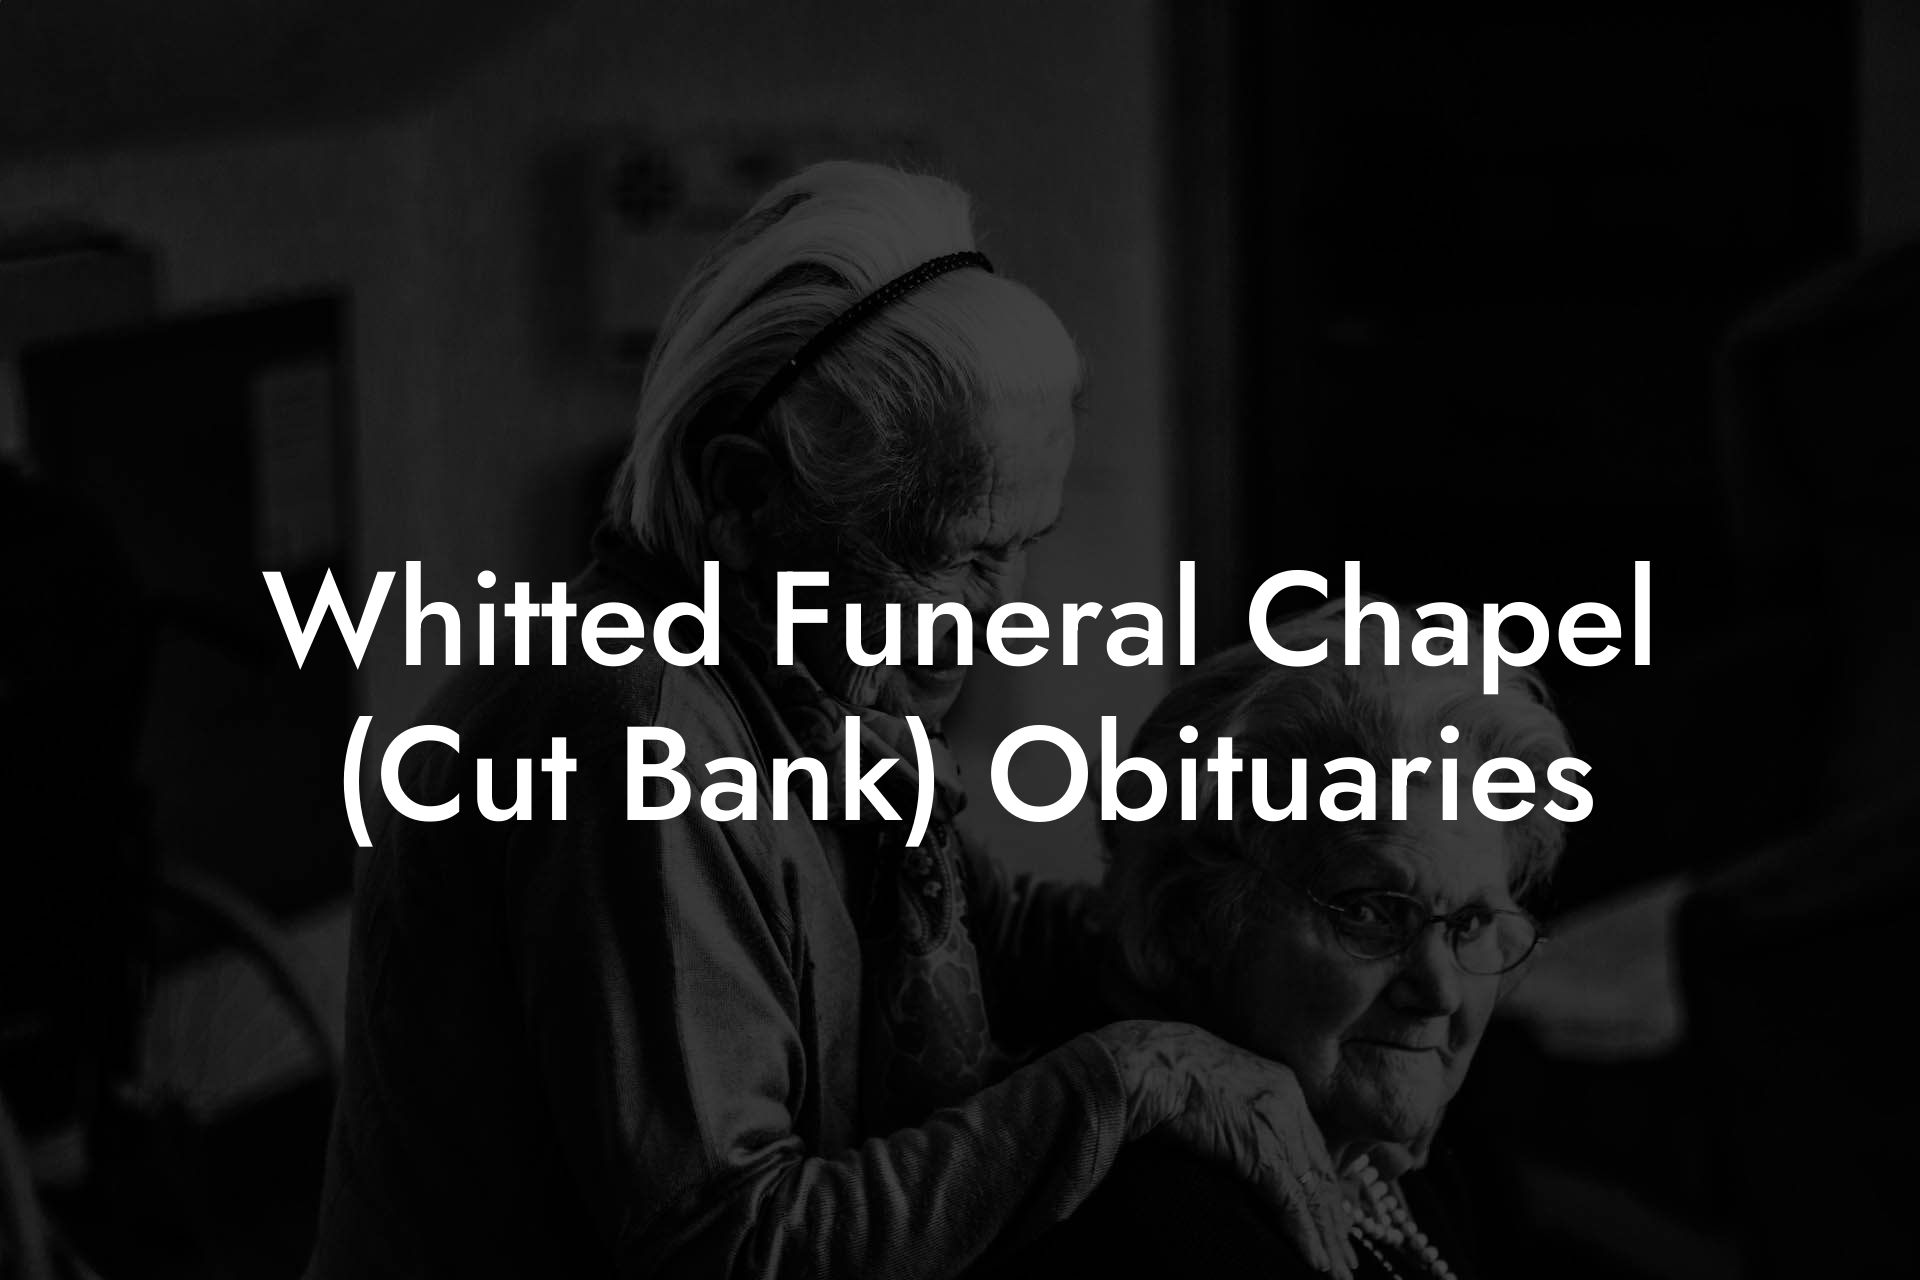 Whitted Funeral Chapel (Cut Bank) Obituaries